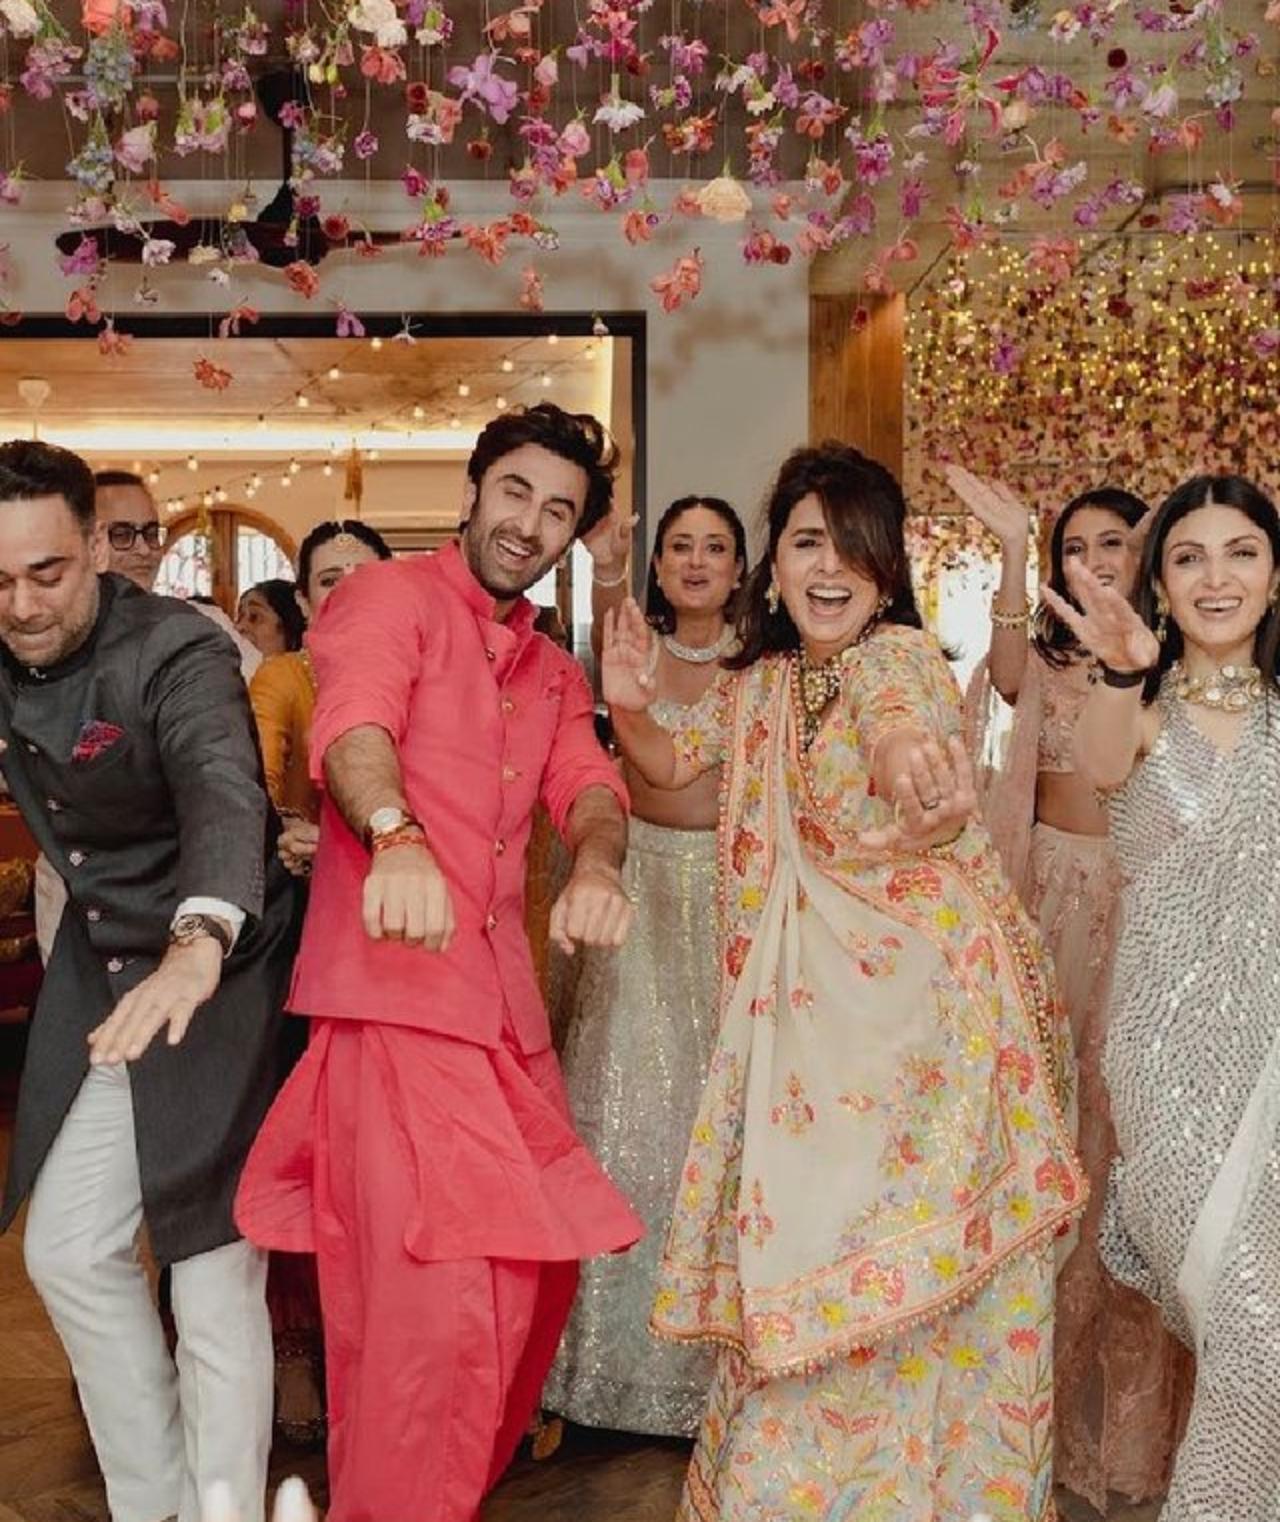 This still from Ranbir Kapoor's wedding shows Neetu Kapoor dancing with joy. She looks very happy in the photograph